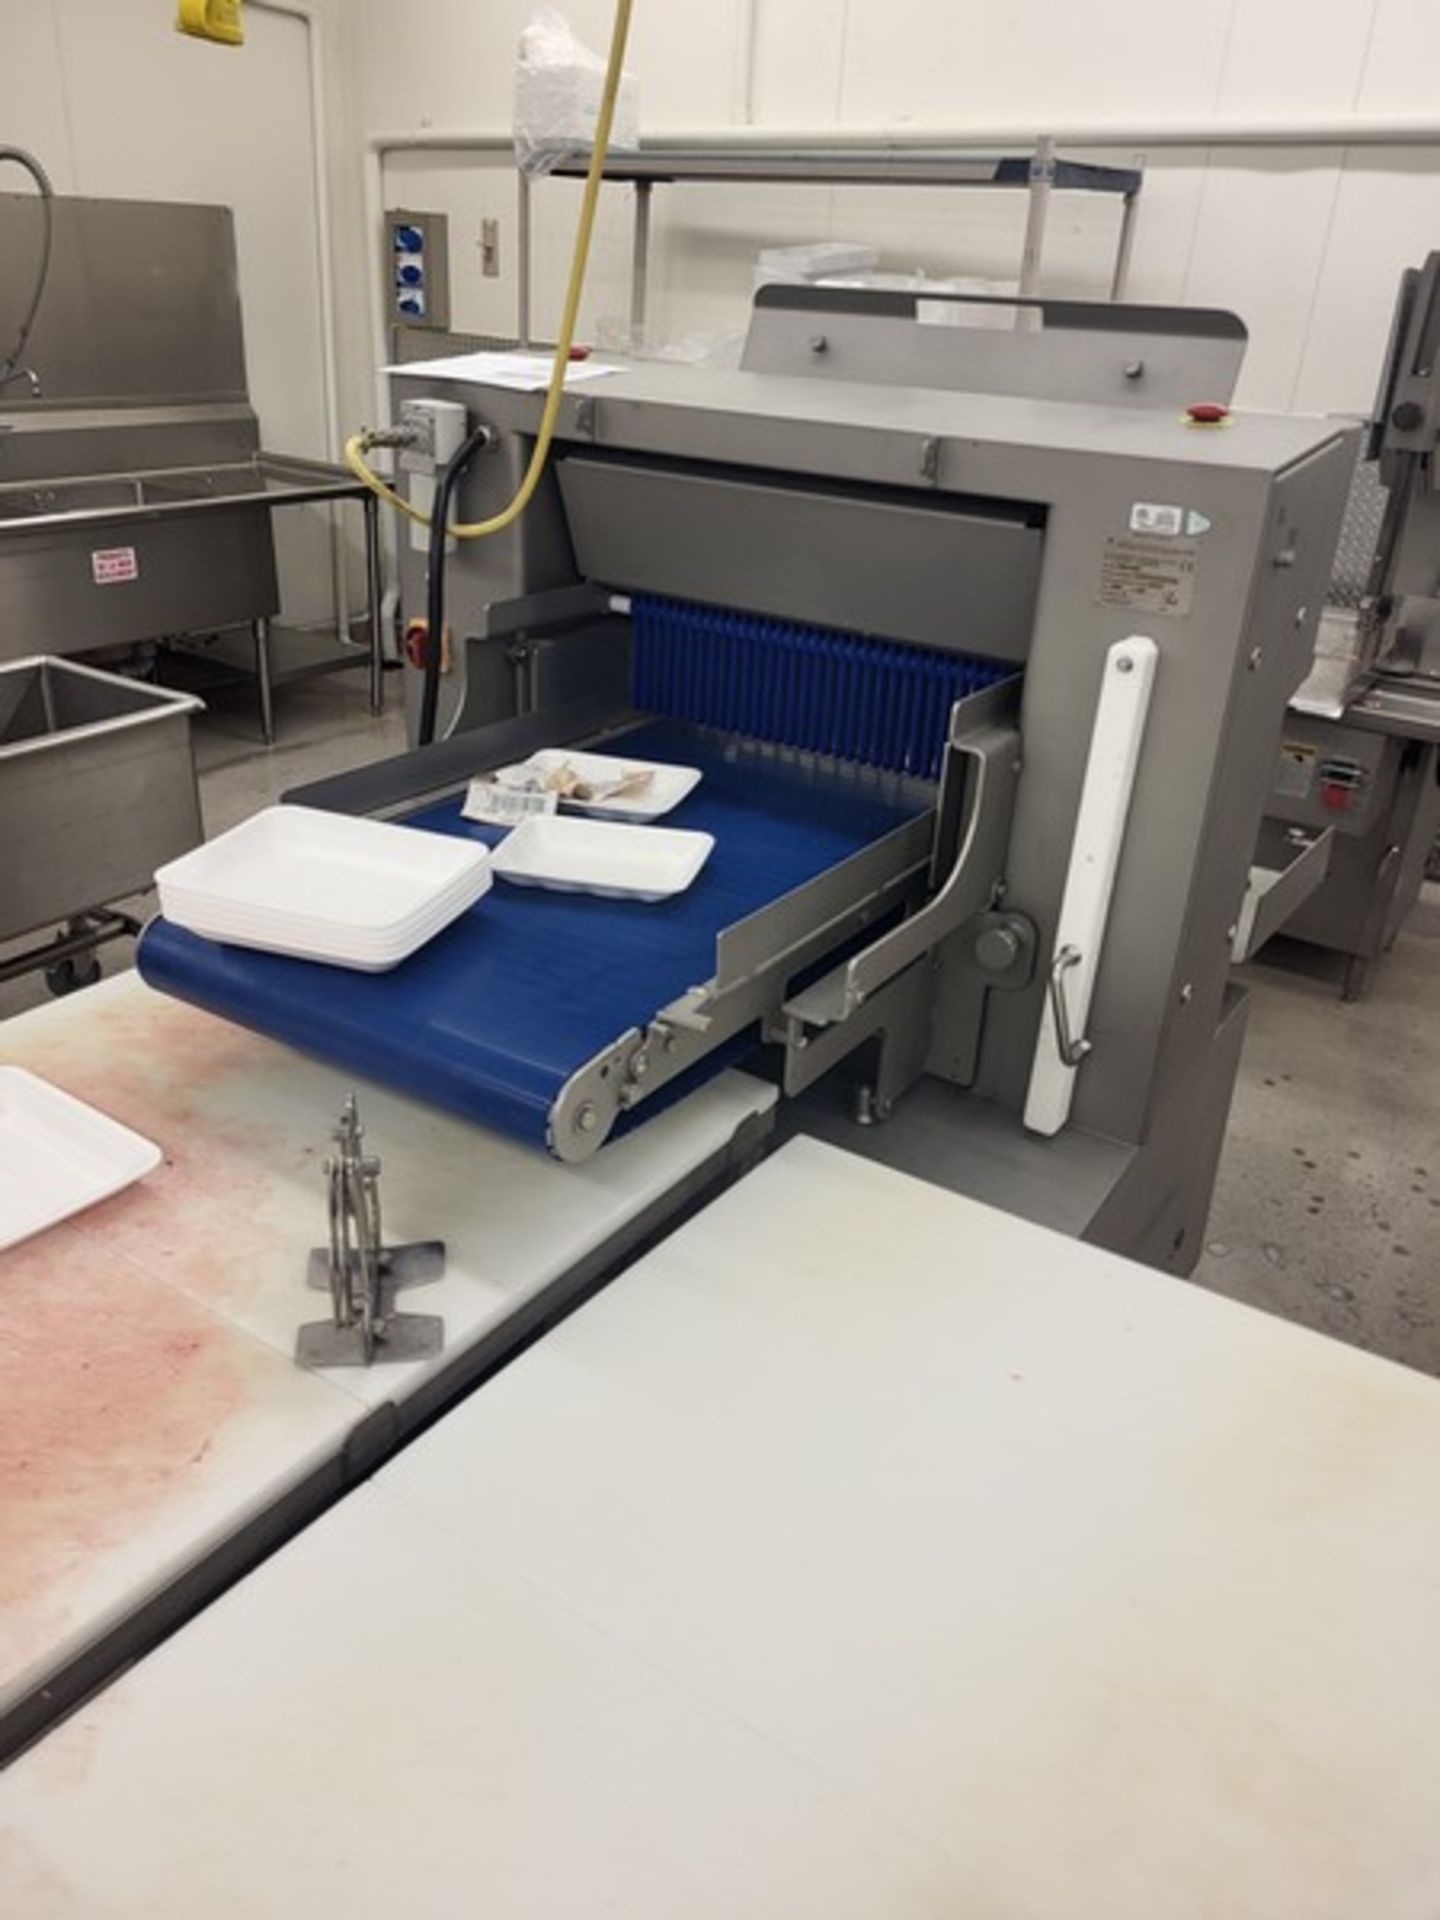 Grasselli Vertical Meat Slicer, Model NSL600 (2013), 208 Volts, 3 Phase for Obtaining Perfectly Even - Image 3 of 4